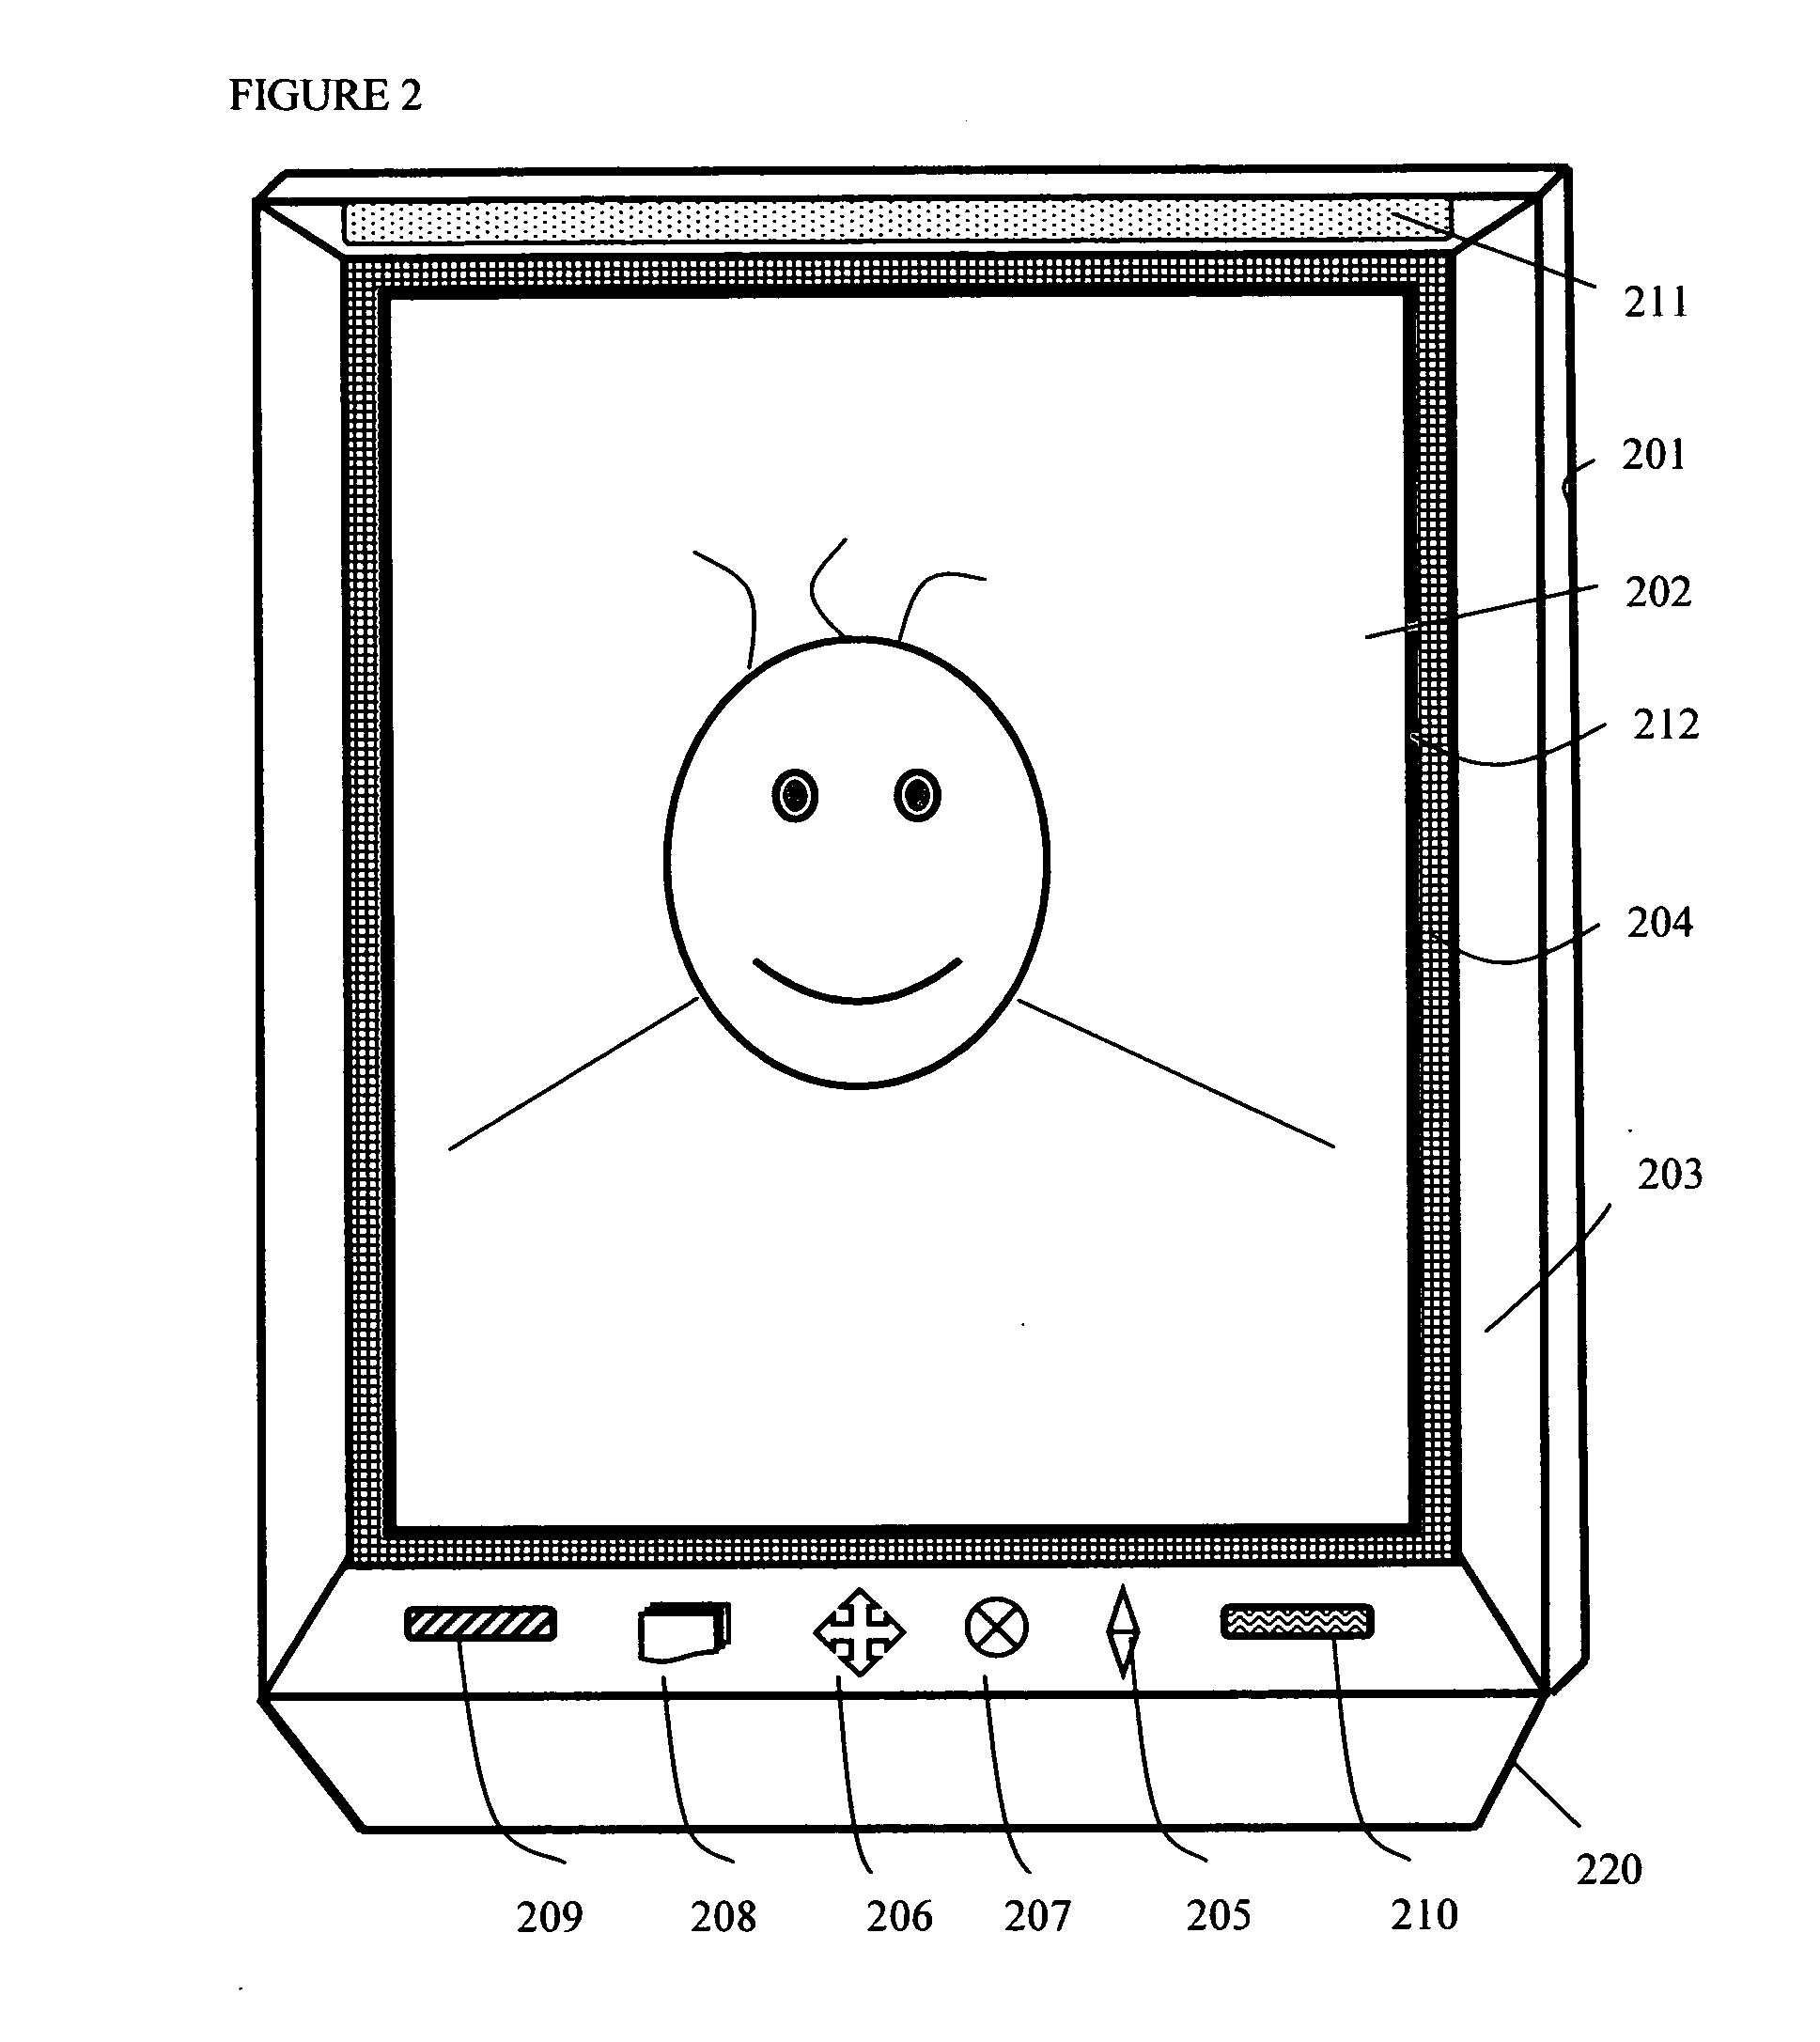 Integrated digital picture viewing device